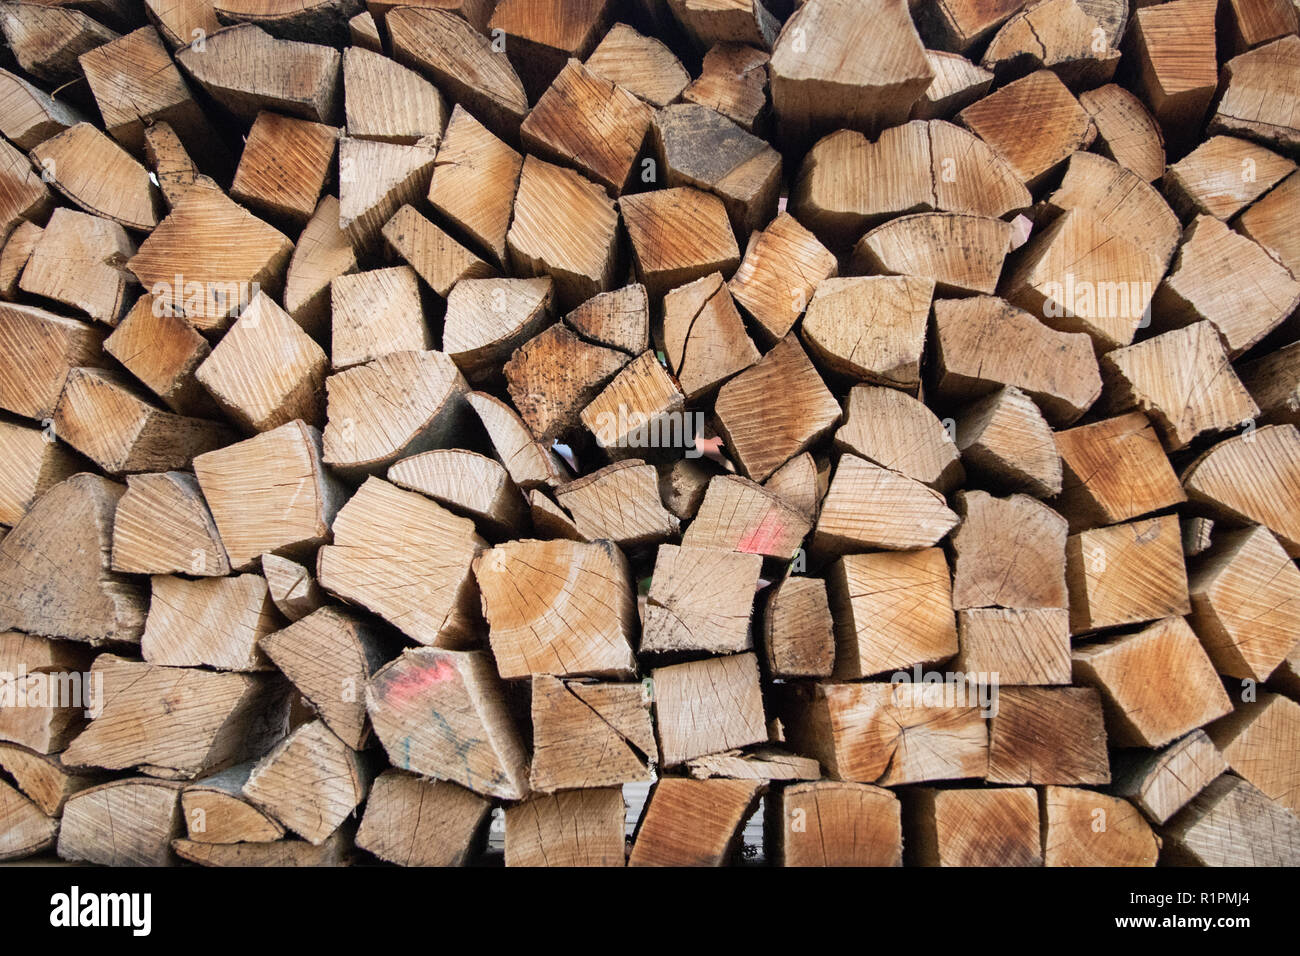 Piles of chopped fire wood side/end view Stock Photo